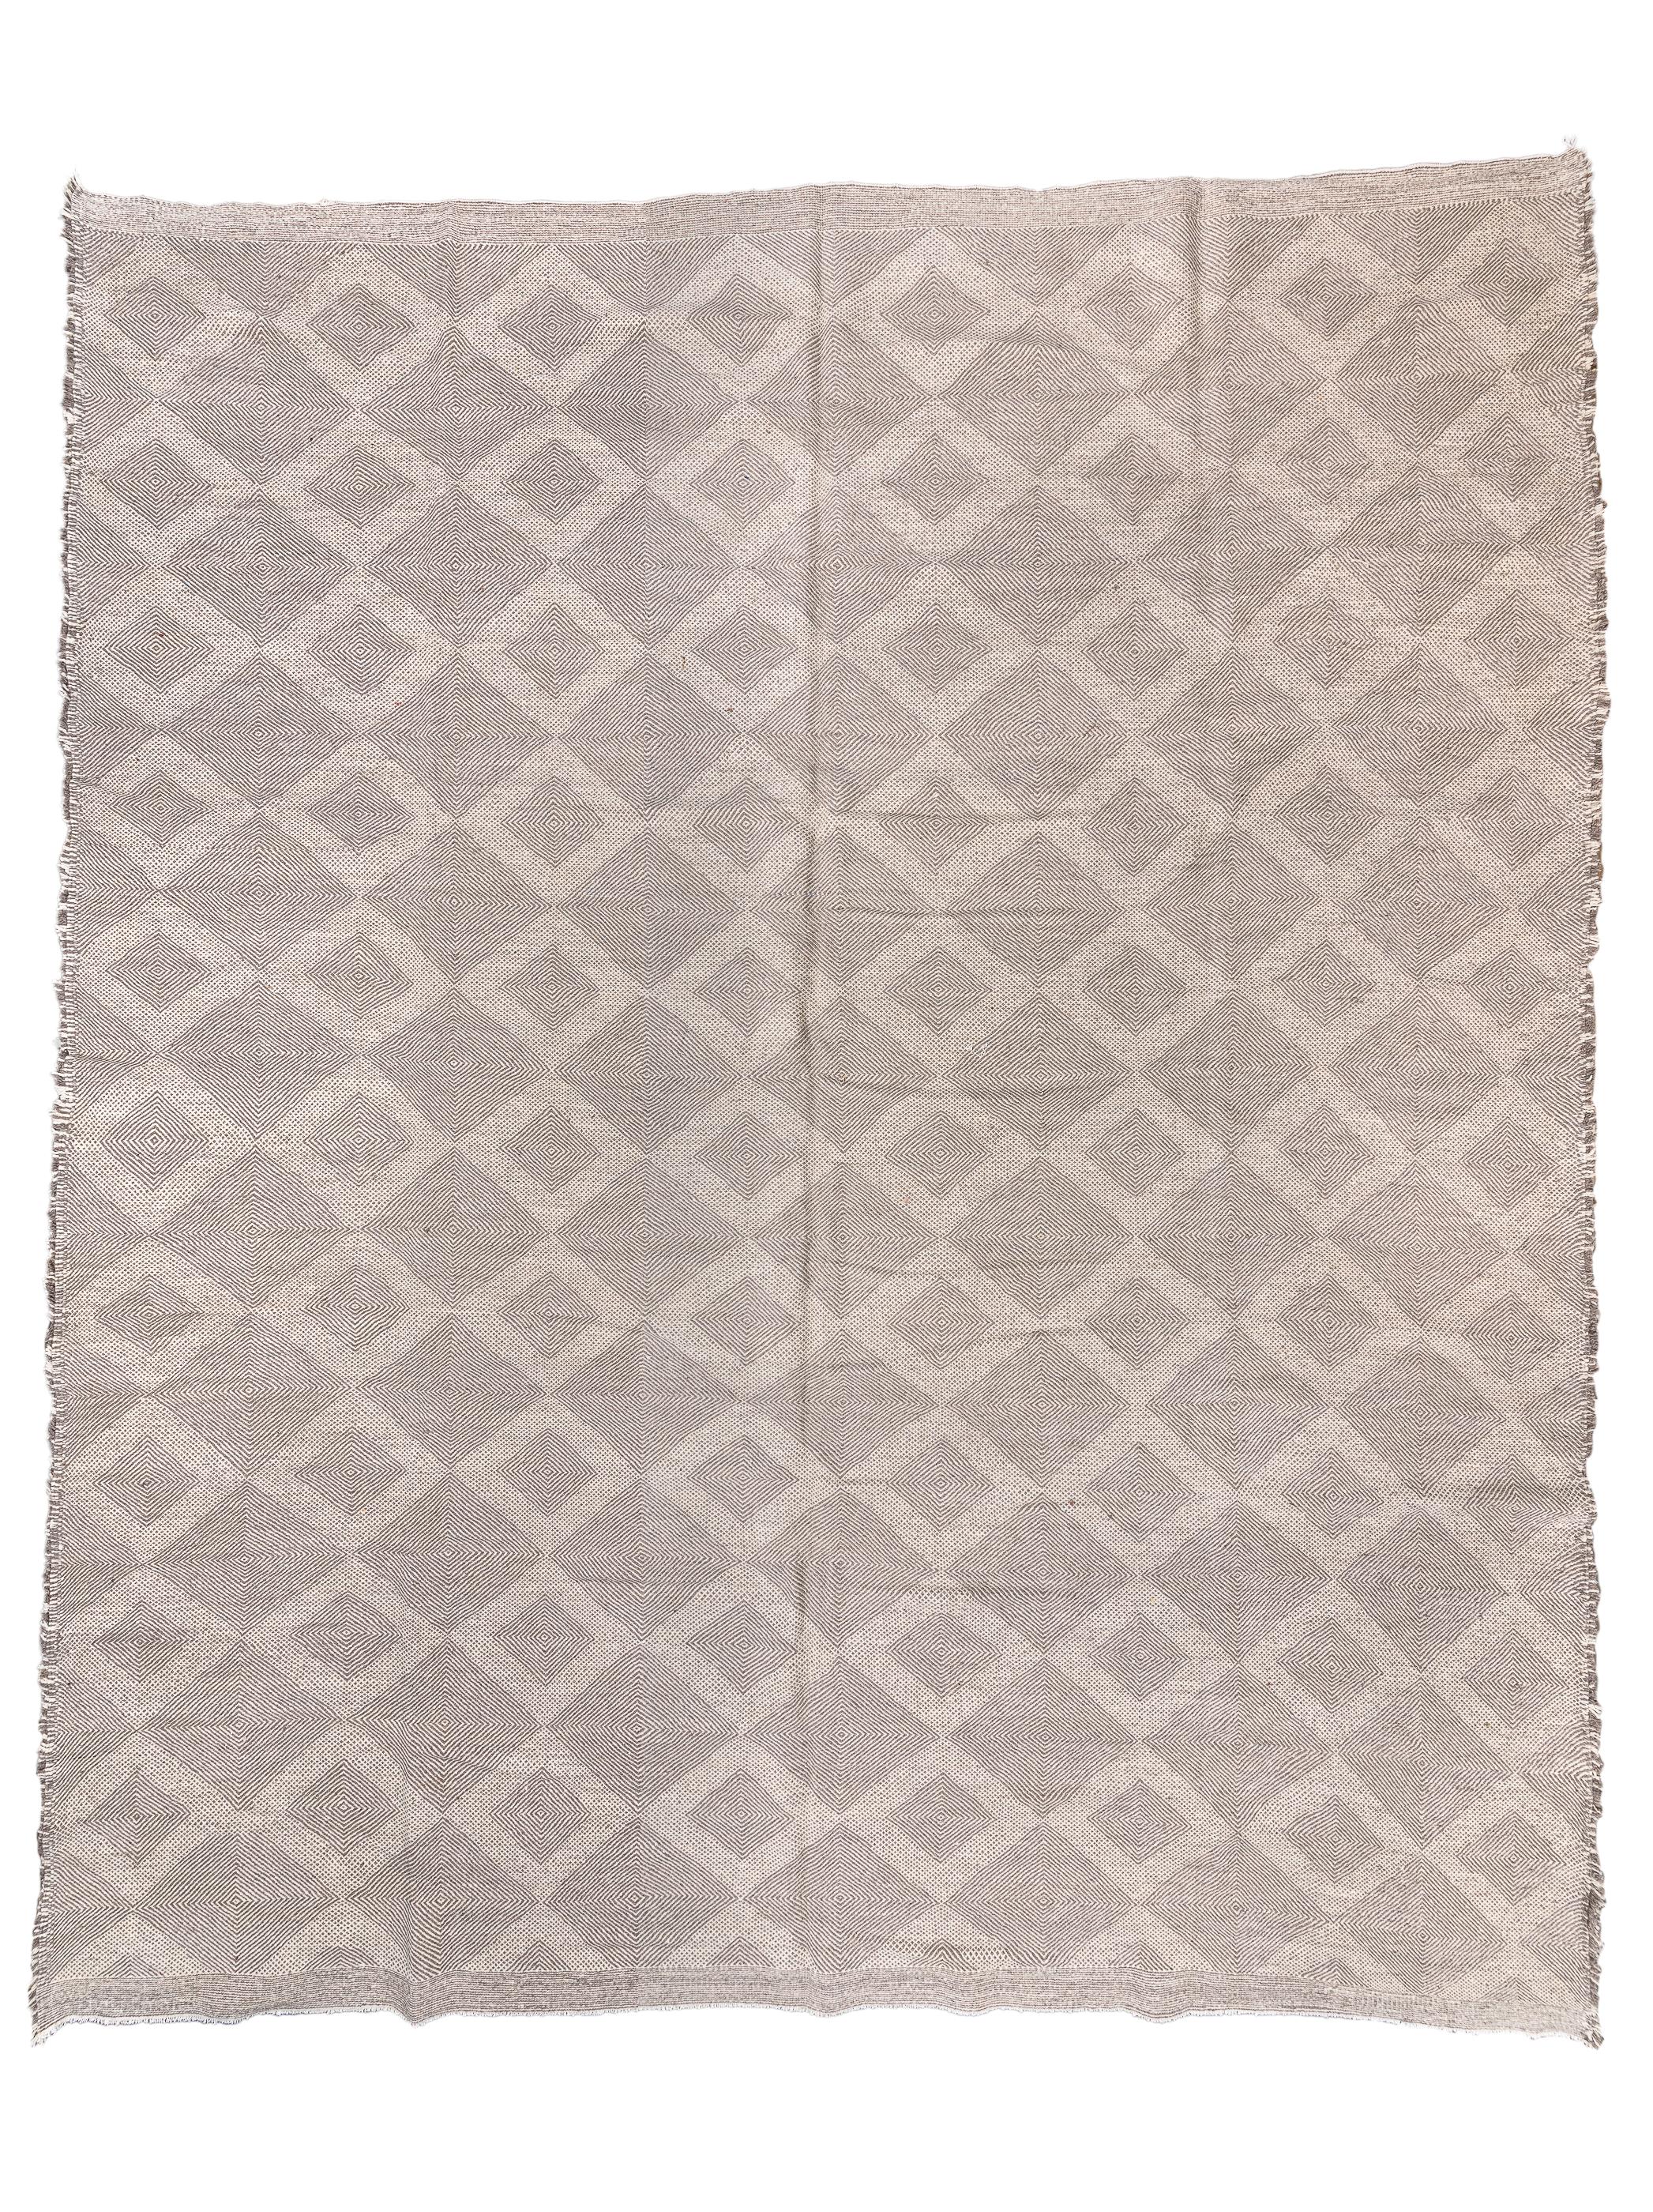 This pileless piece features a lattice of larger and smaller diamonds in light grey while the lattice is in pale grey. Or one could see it as columns of larger and smaller grey lozenges on a light field. Or darker, rough selvage makes a very skinny